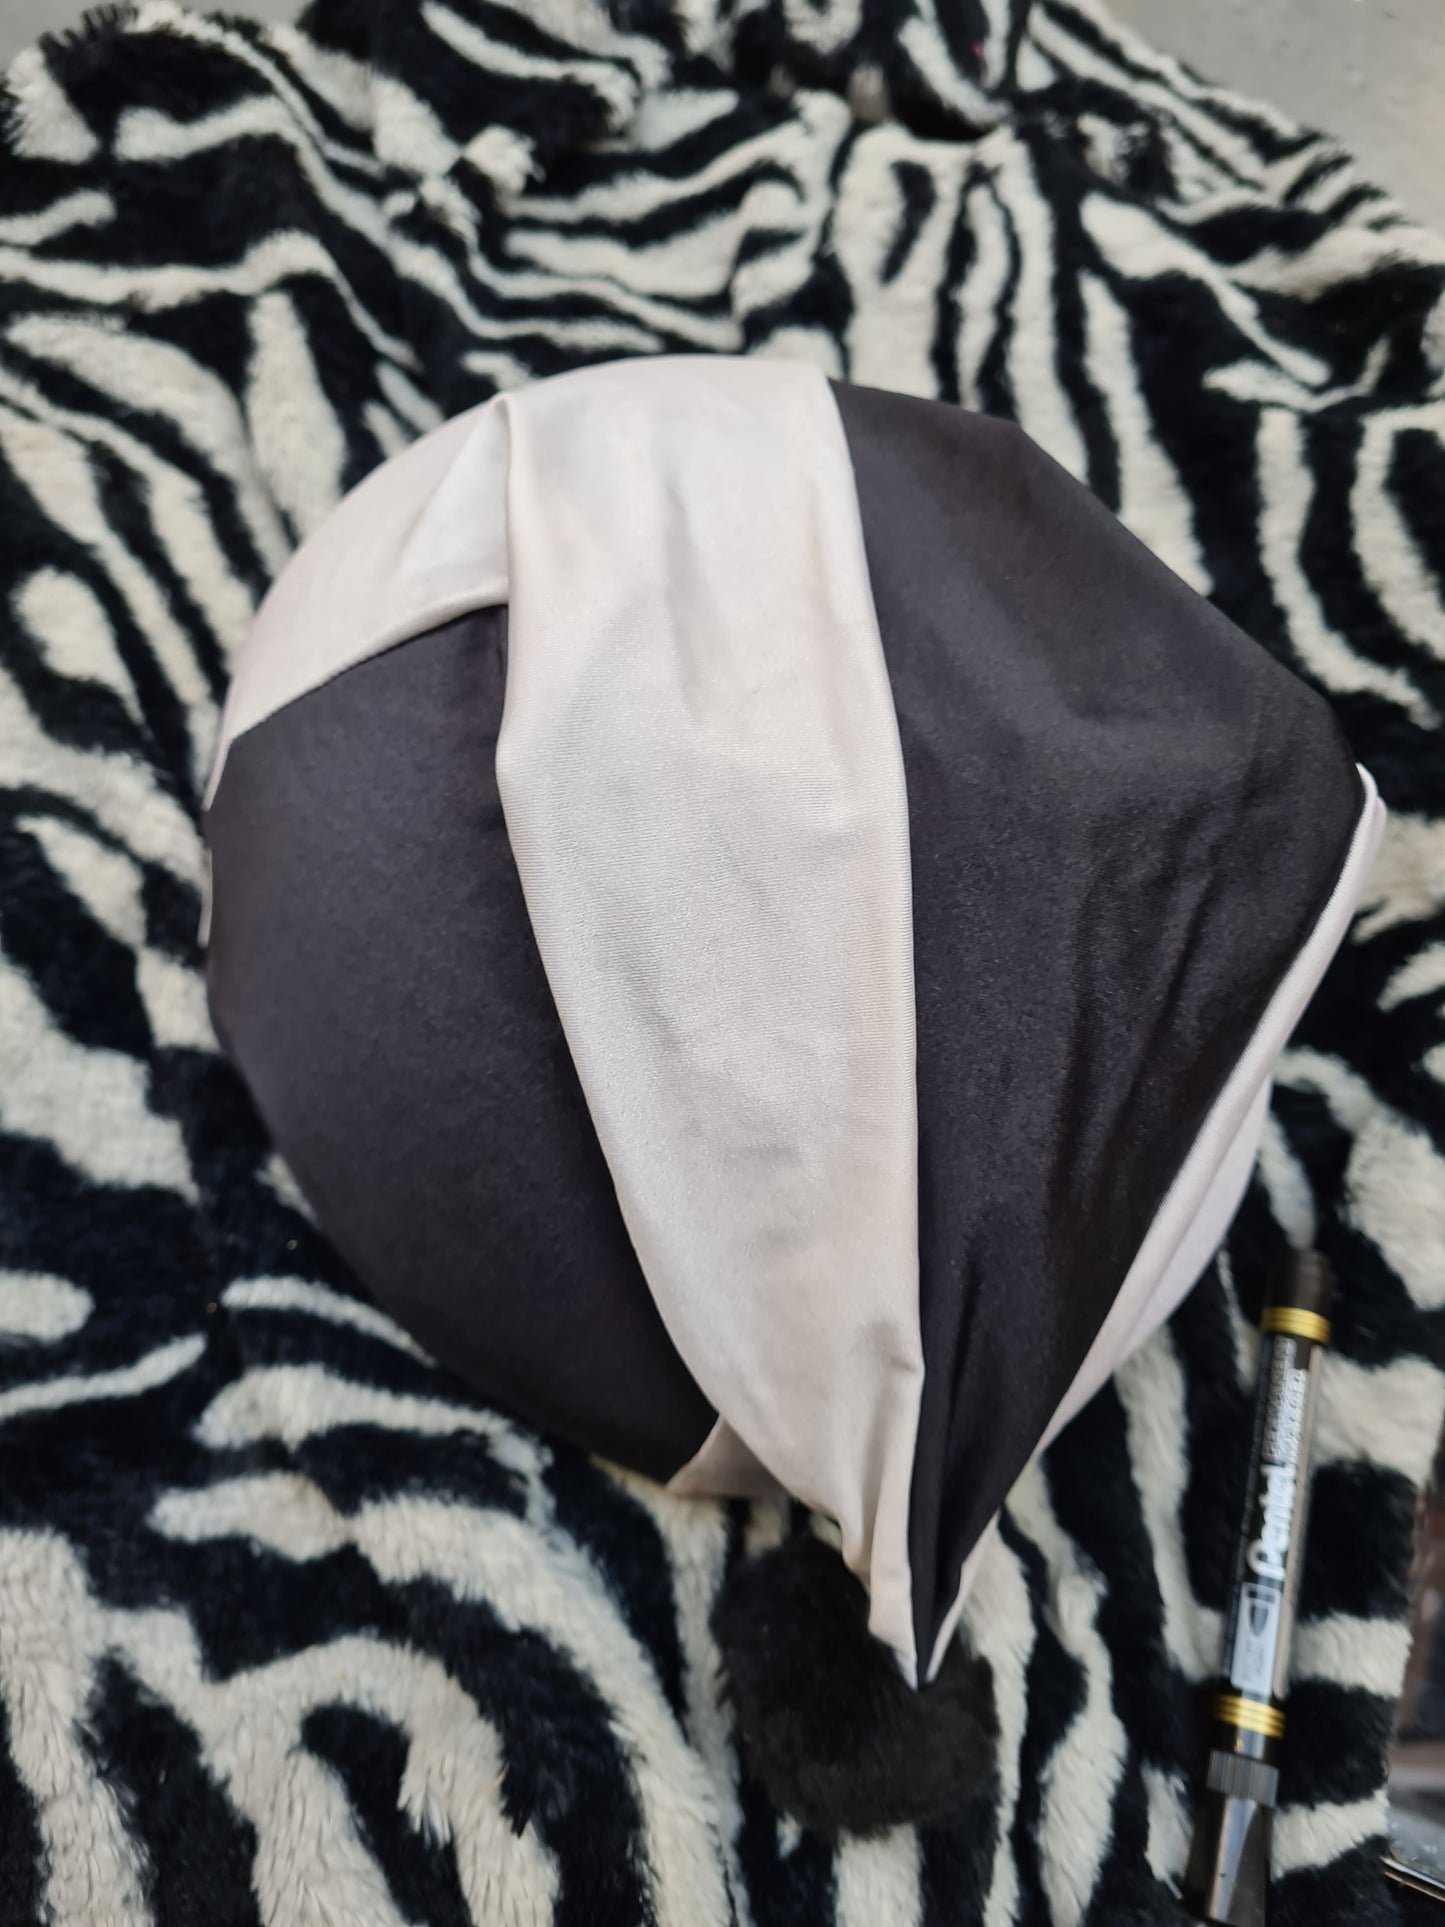 Used black and white silk hat cover FREE POSTAGE 🟣